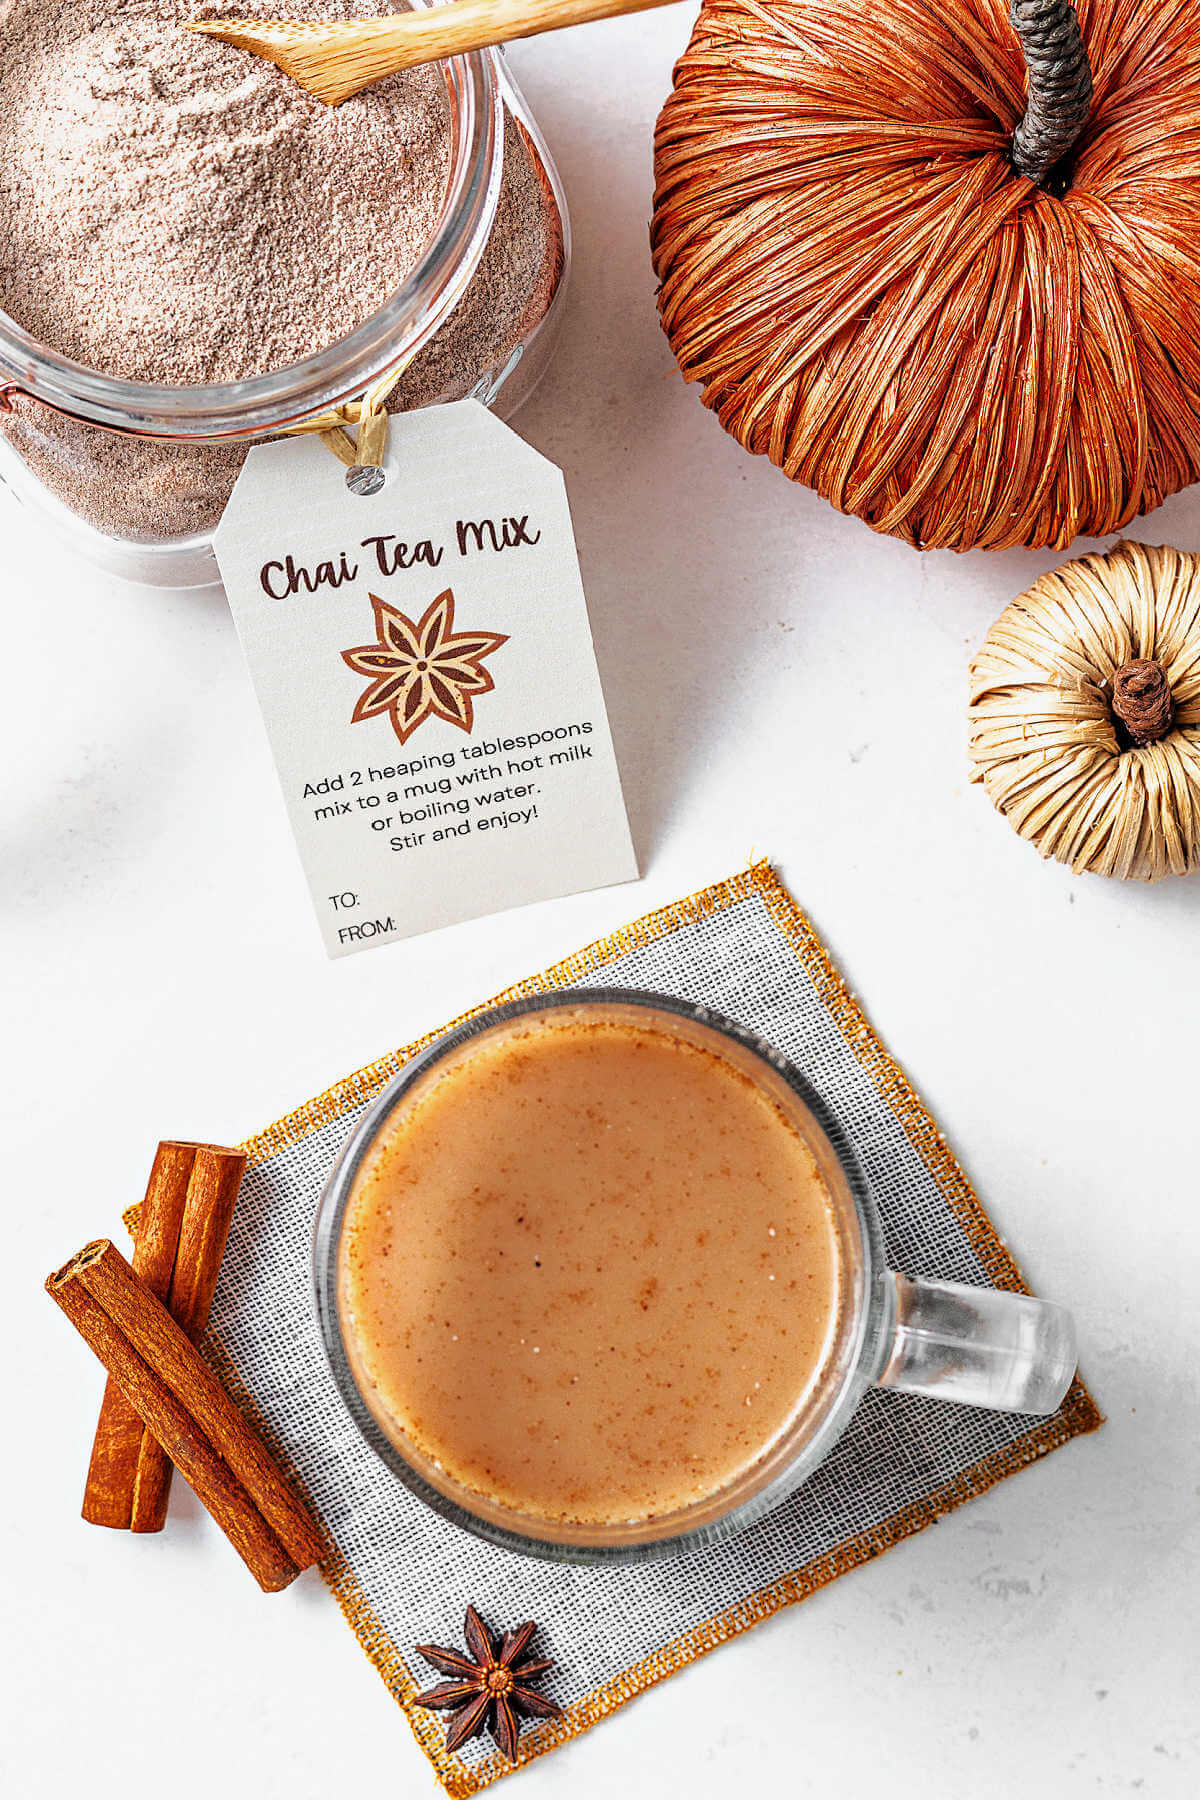 chai latte tea mix in a glass jar with a gift tag and a cup of chai tea on a coaster on a table.